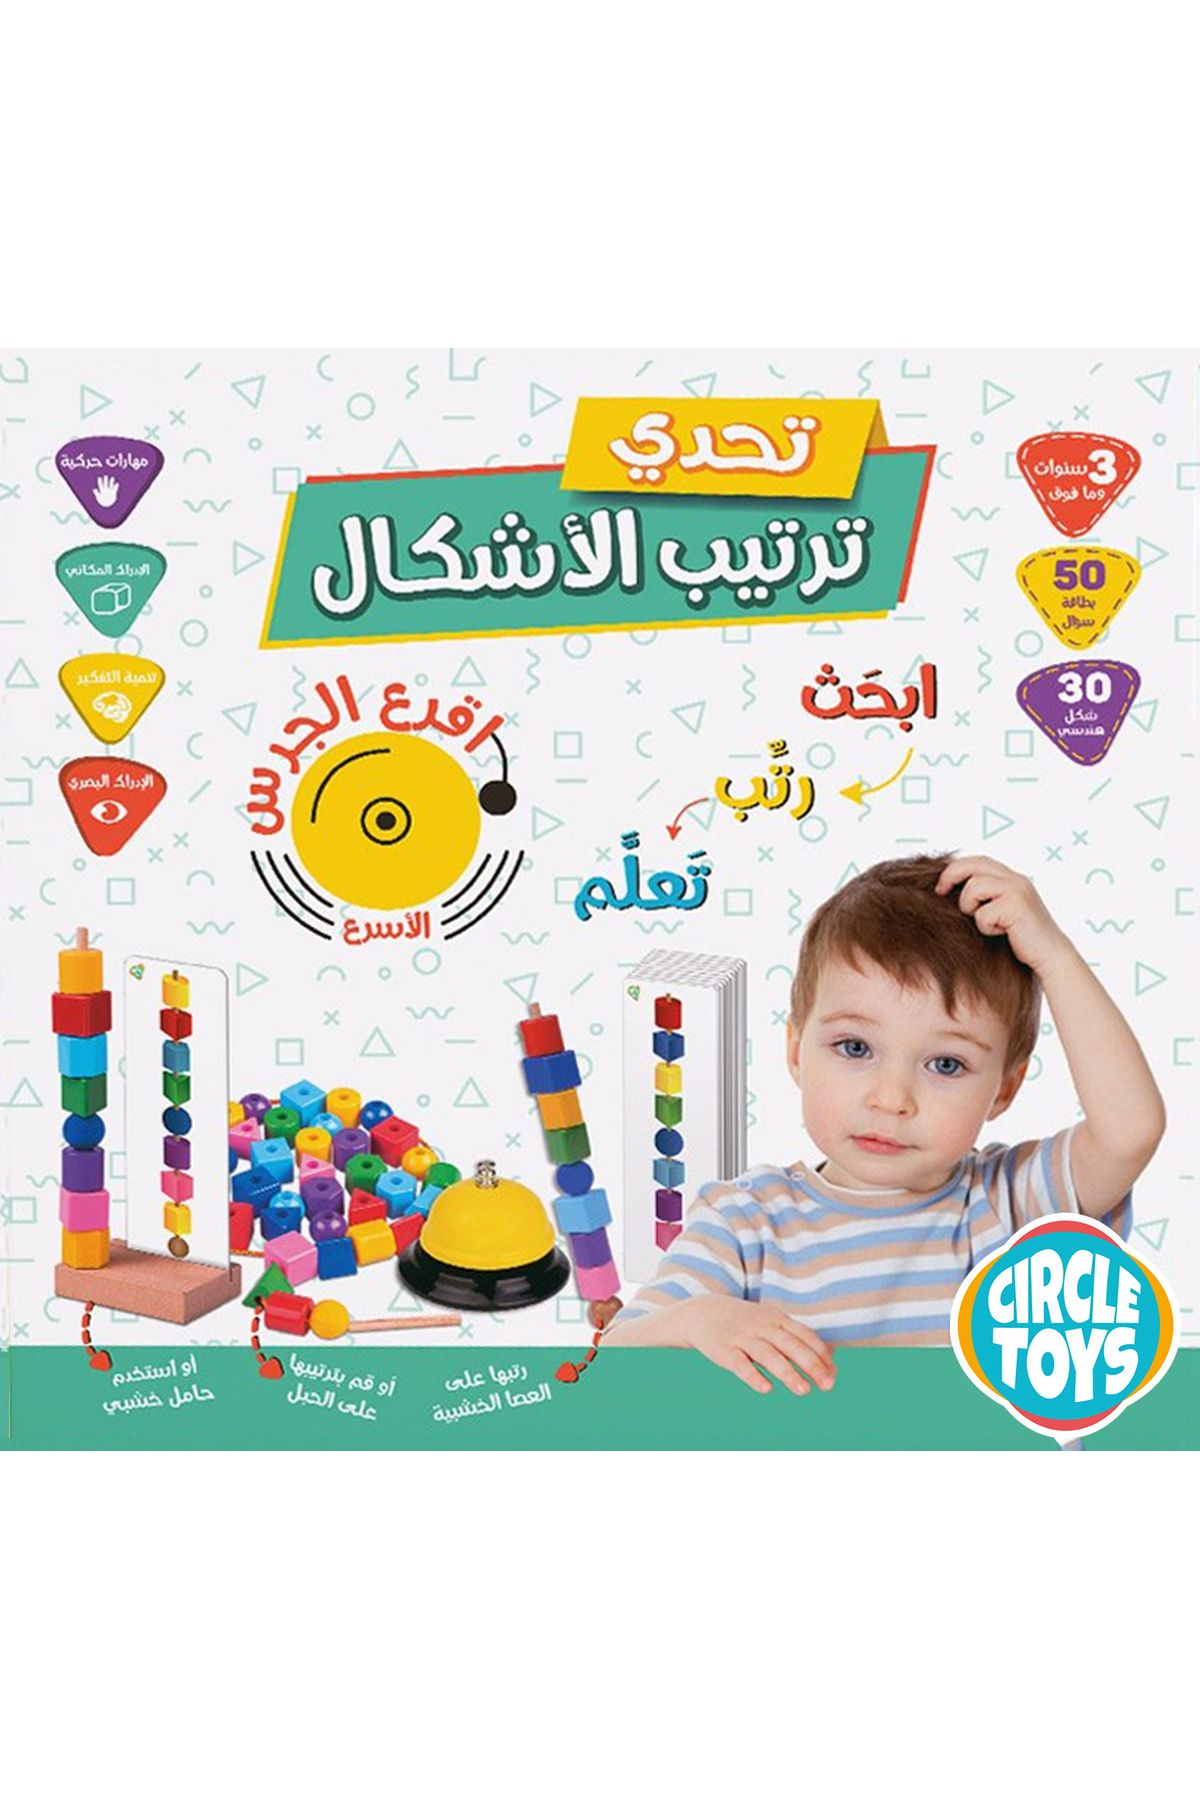 Circle Toys +3 Years Line Up Find Sort Learn Geometric Shapes Question Cards Competition Arabic Box Game